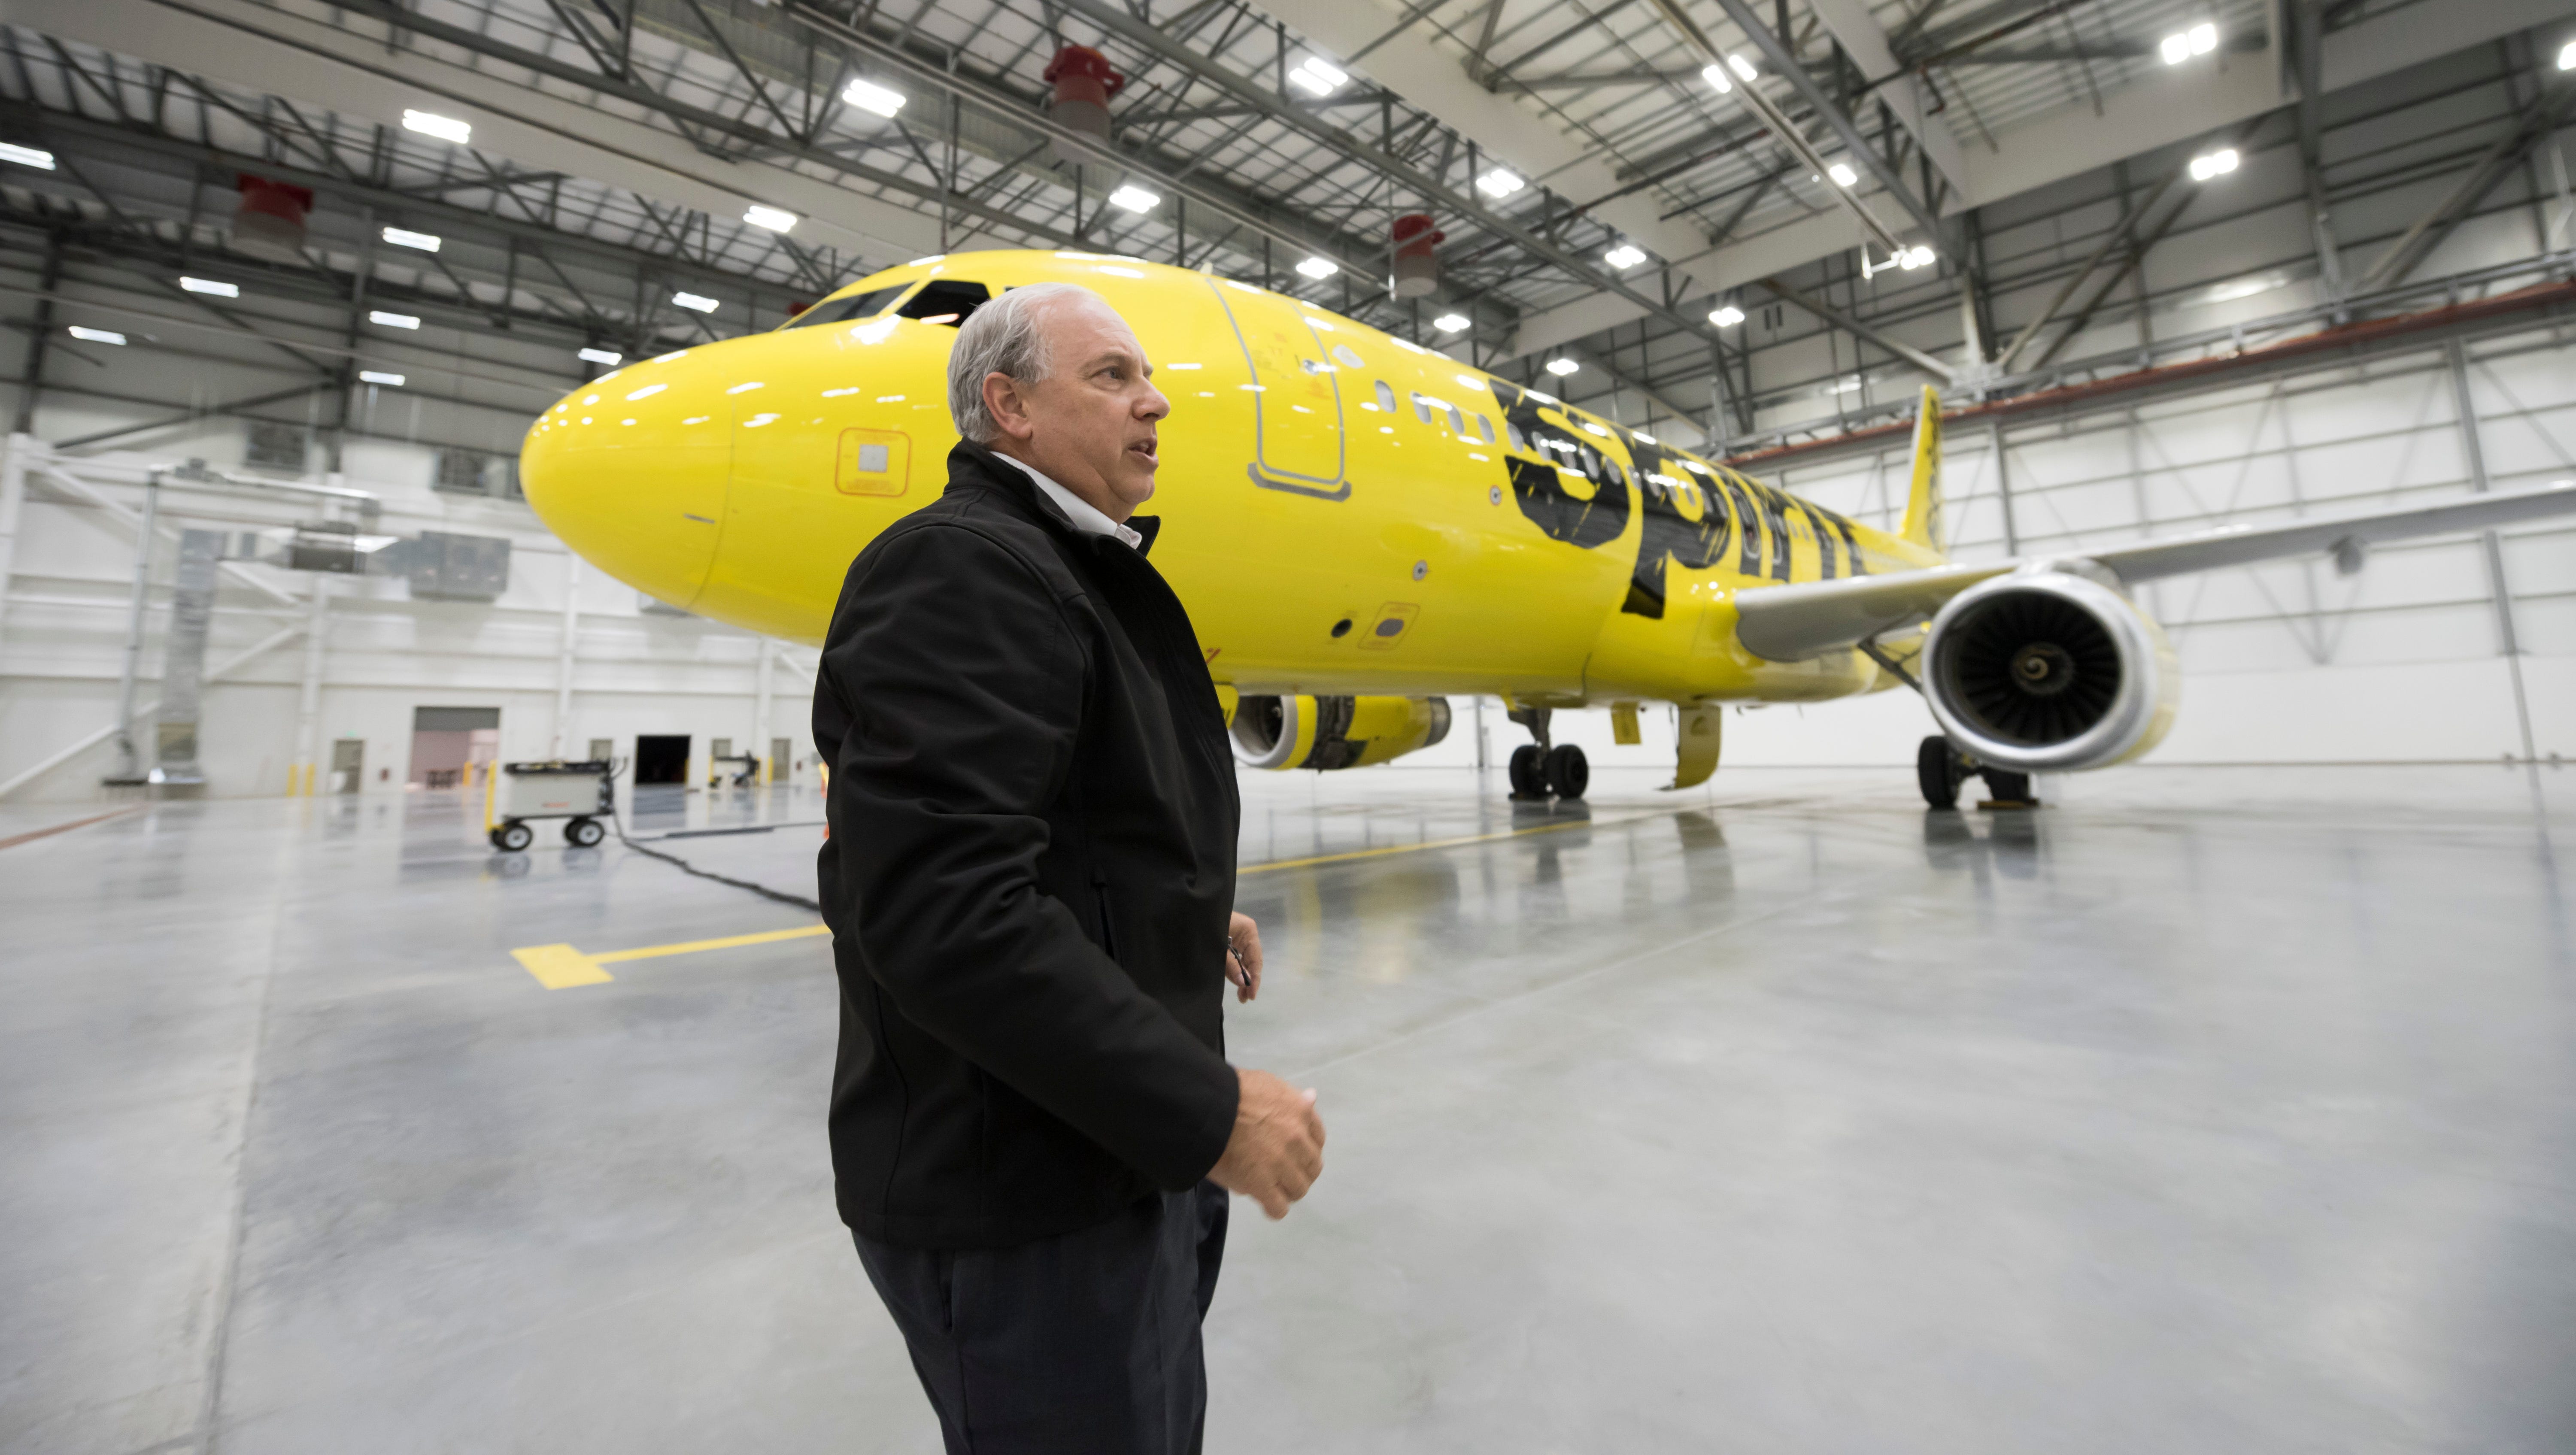 Kirk Thornburg, vice president of technical operations, is seen in the new maintenance hangar for Spirit Airlines.